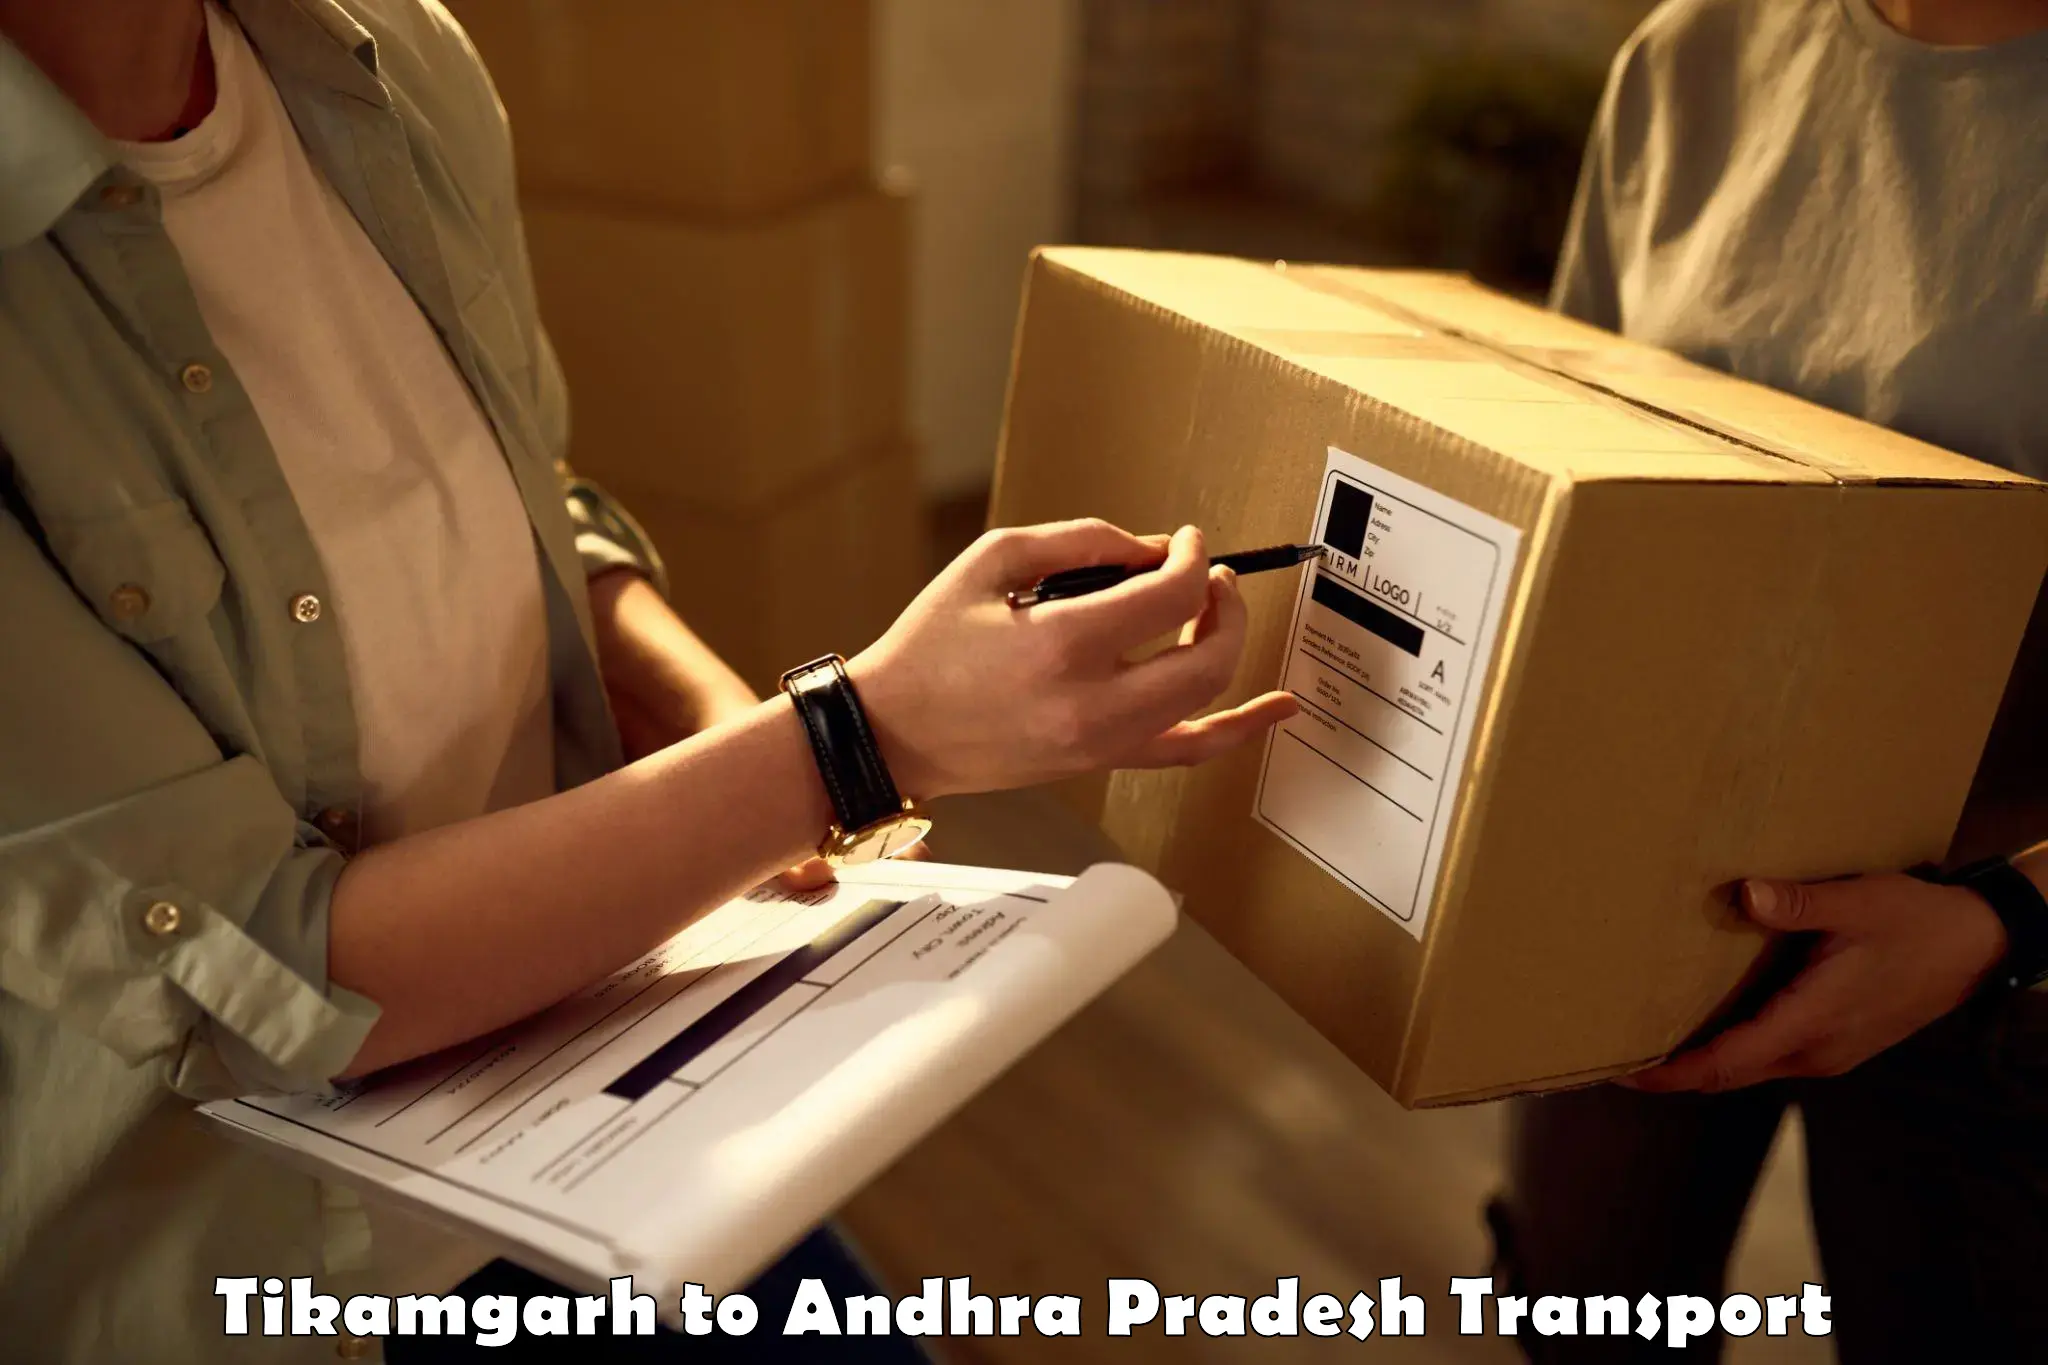 Delivery service Tikamgarh to Punganur